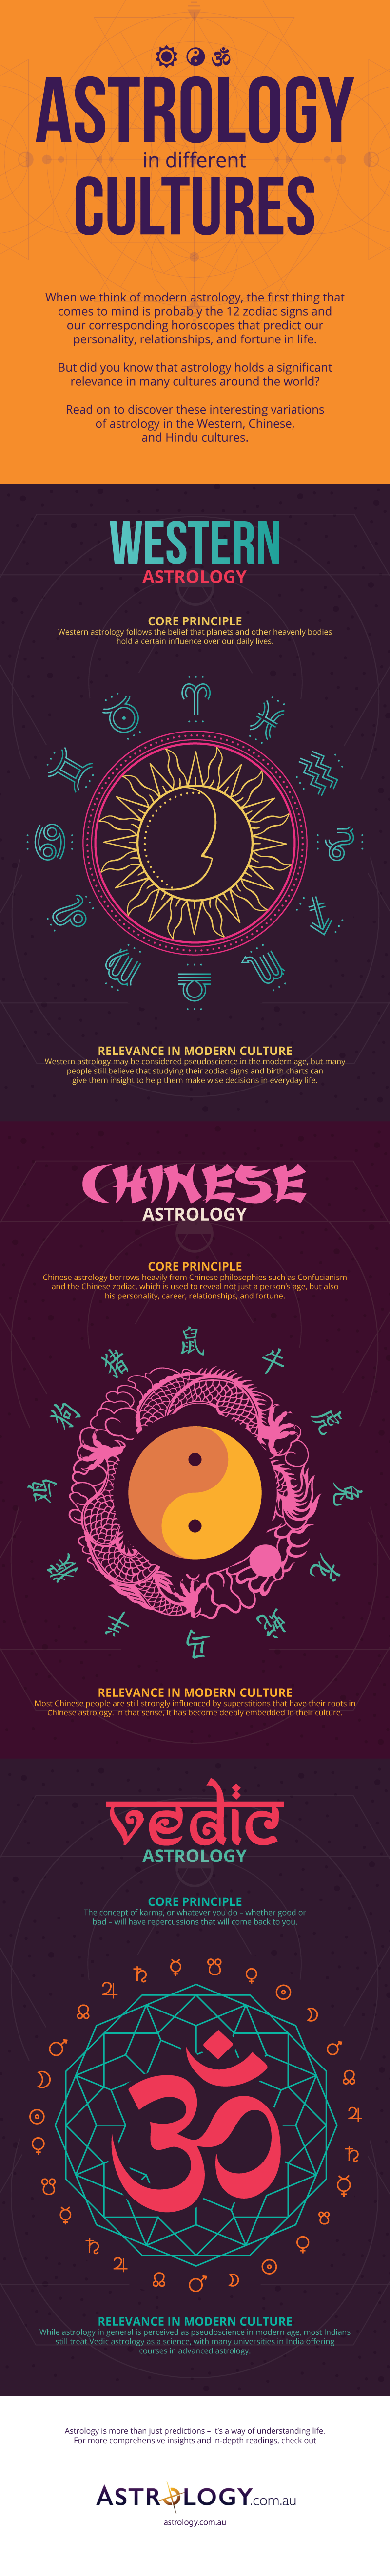 Looking for Answers in the Sky: Astrology Across Cultures - Infographic